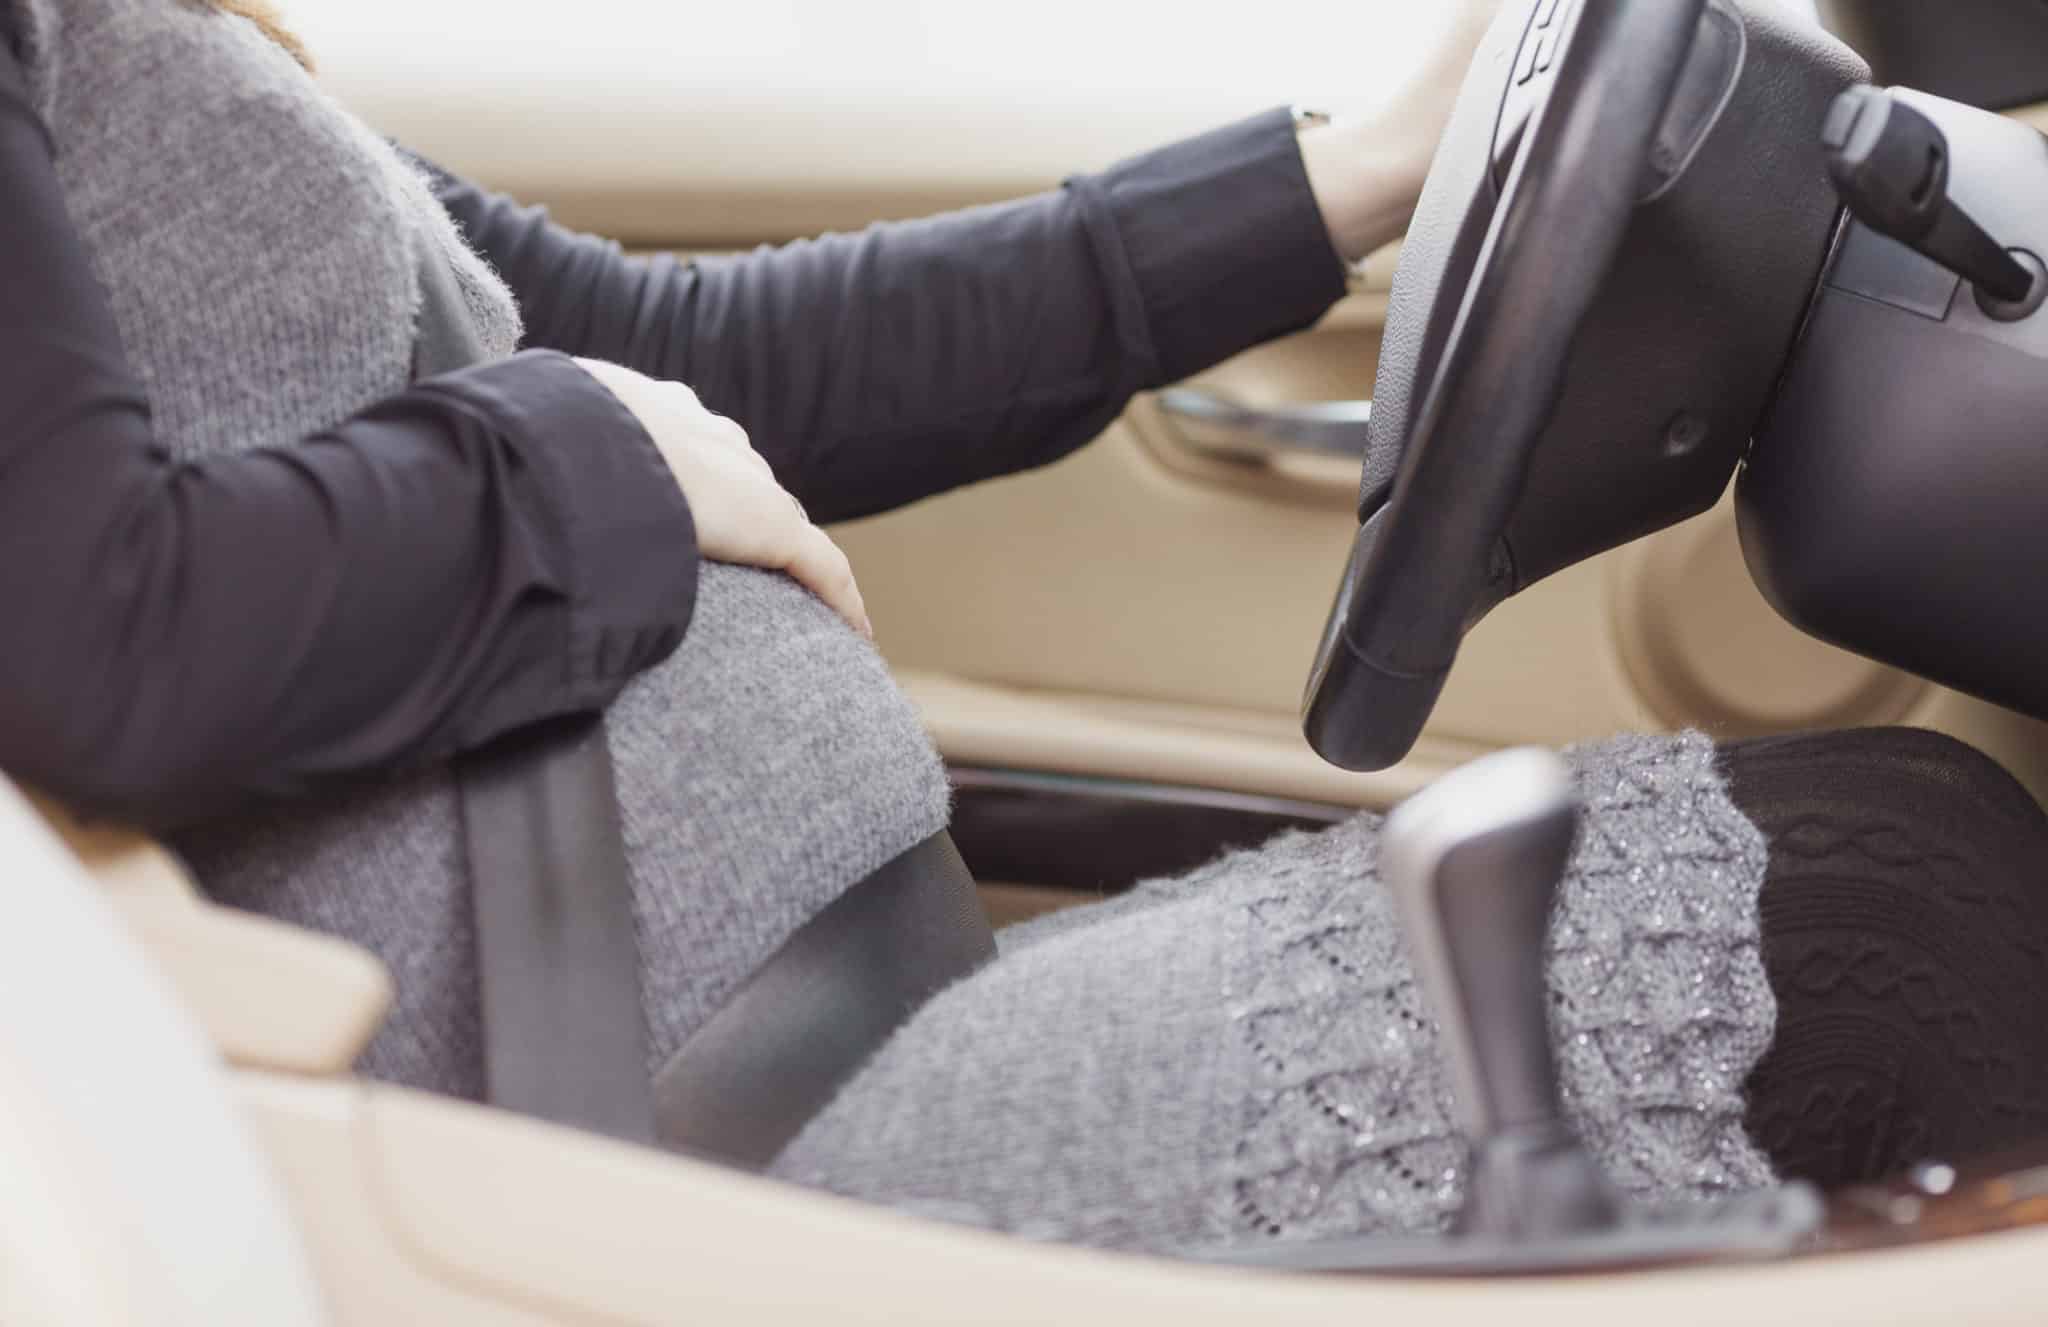 Safety Tips for Driving While Pregnant